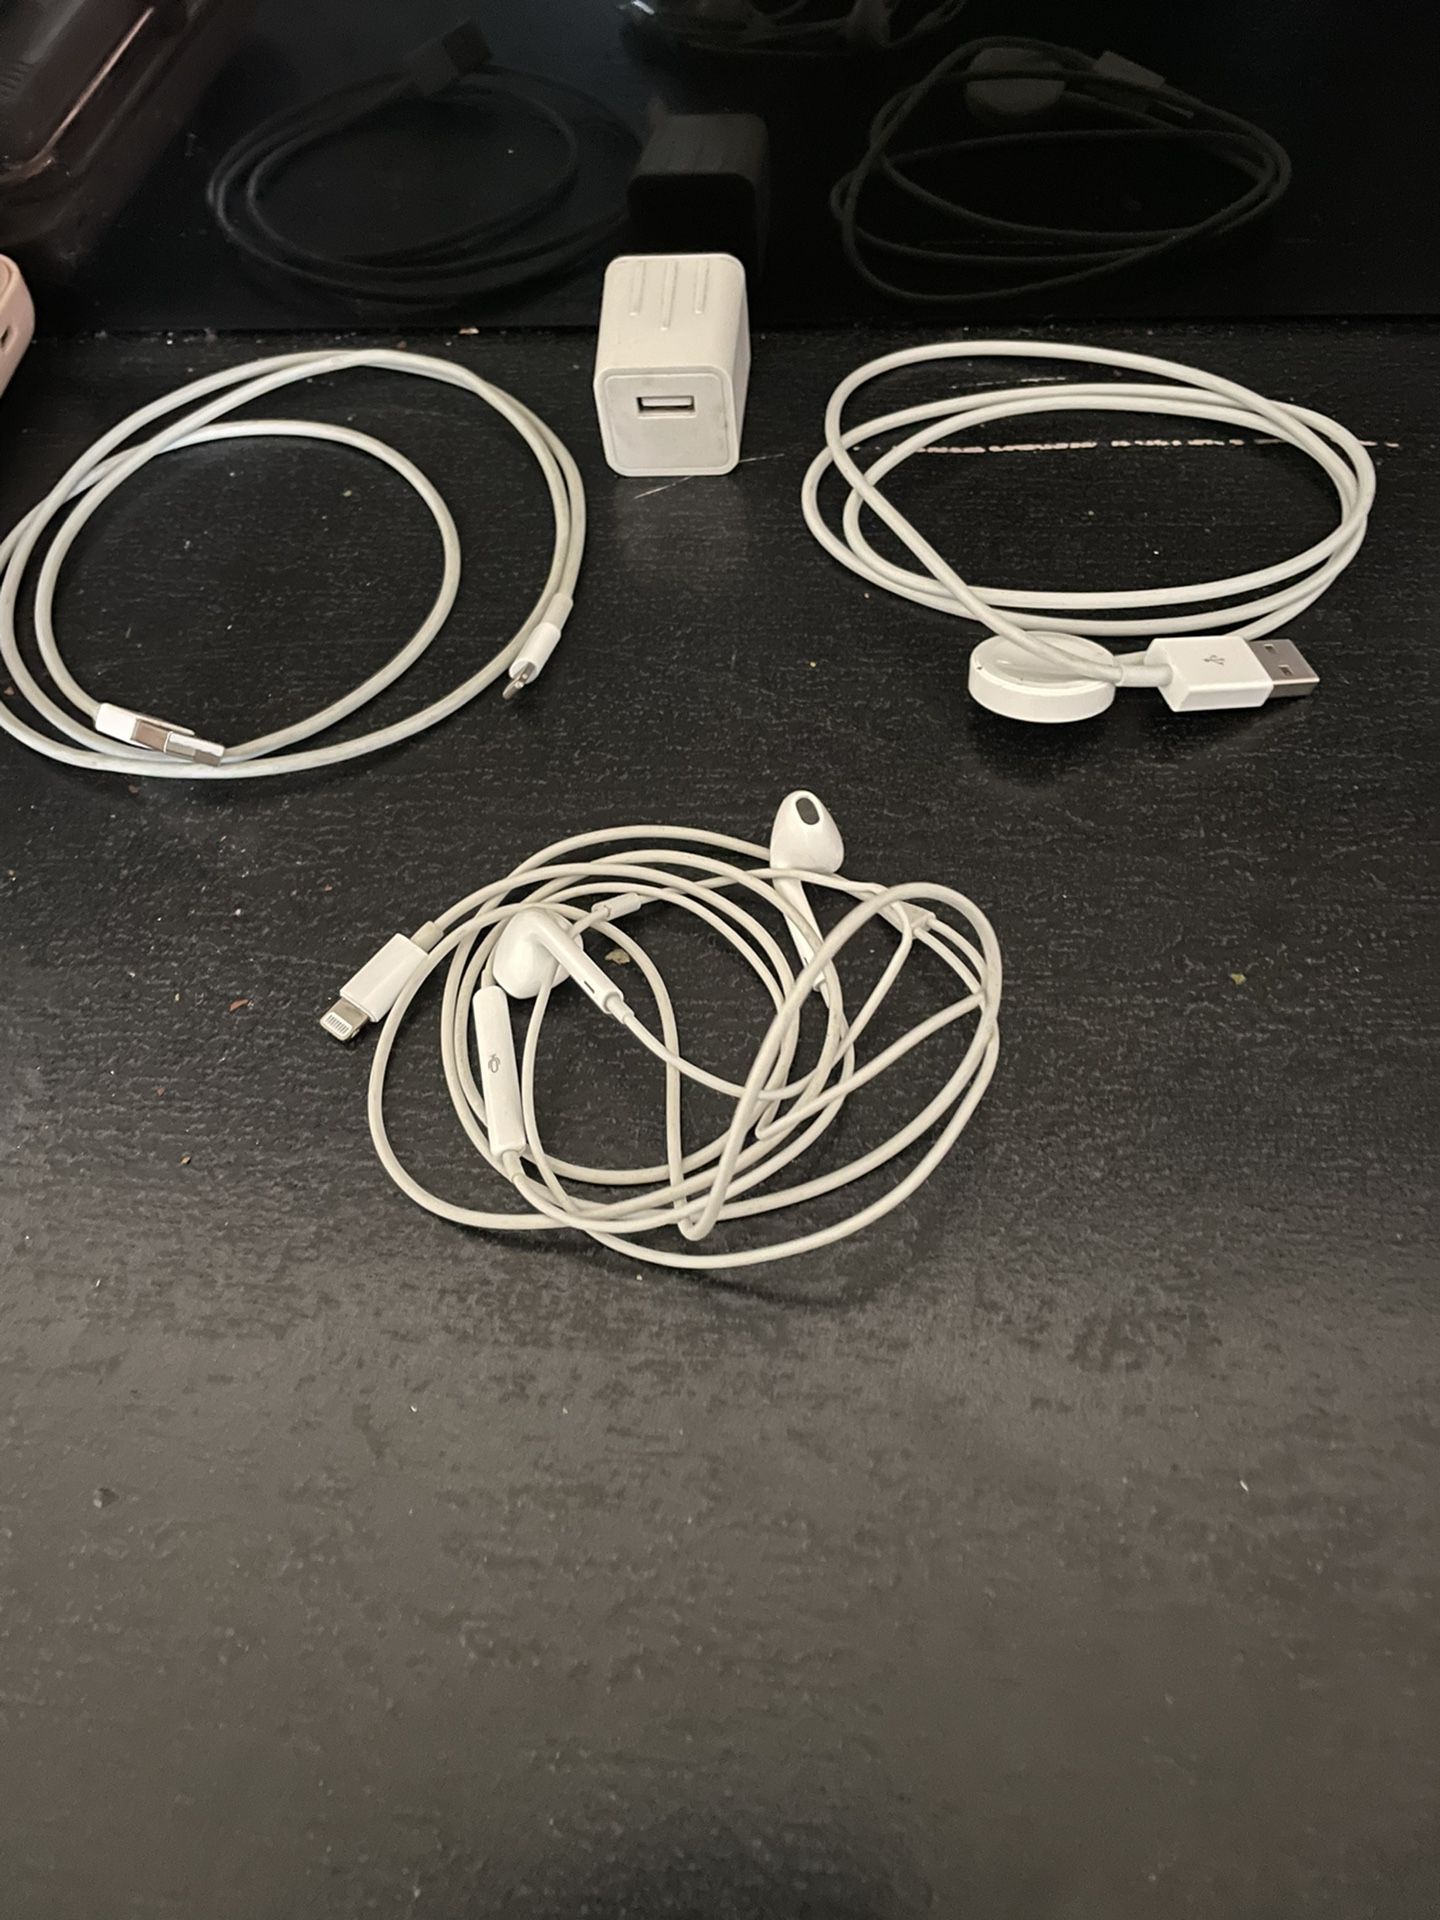 Apple Watch Charger iPhone Phone Charger And iPhone Headphones Everything For 25.00